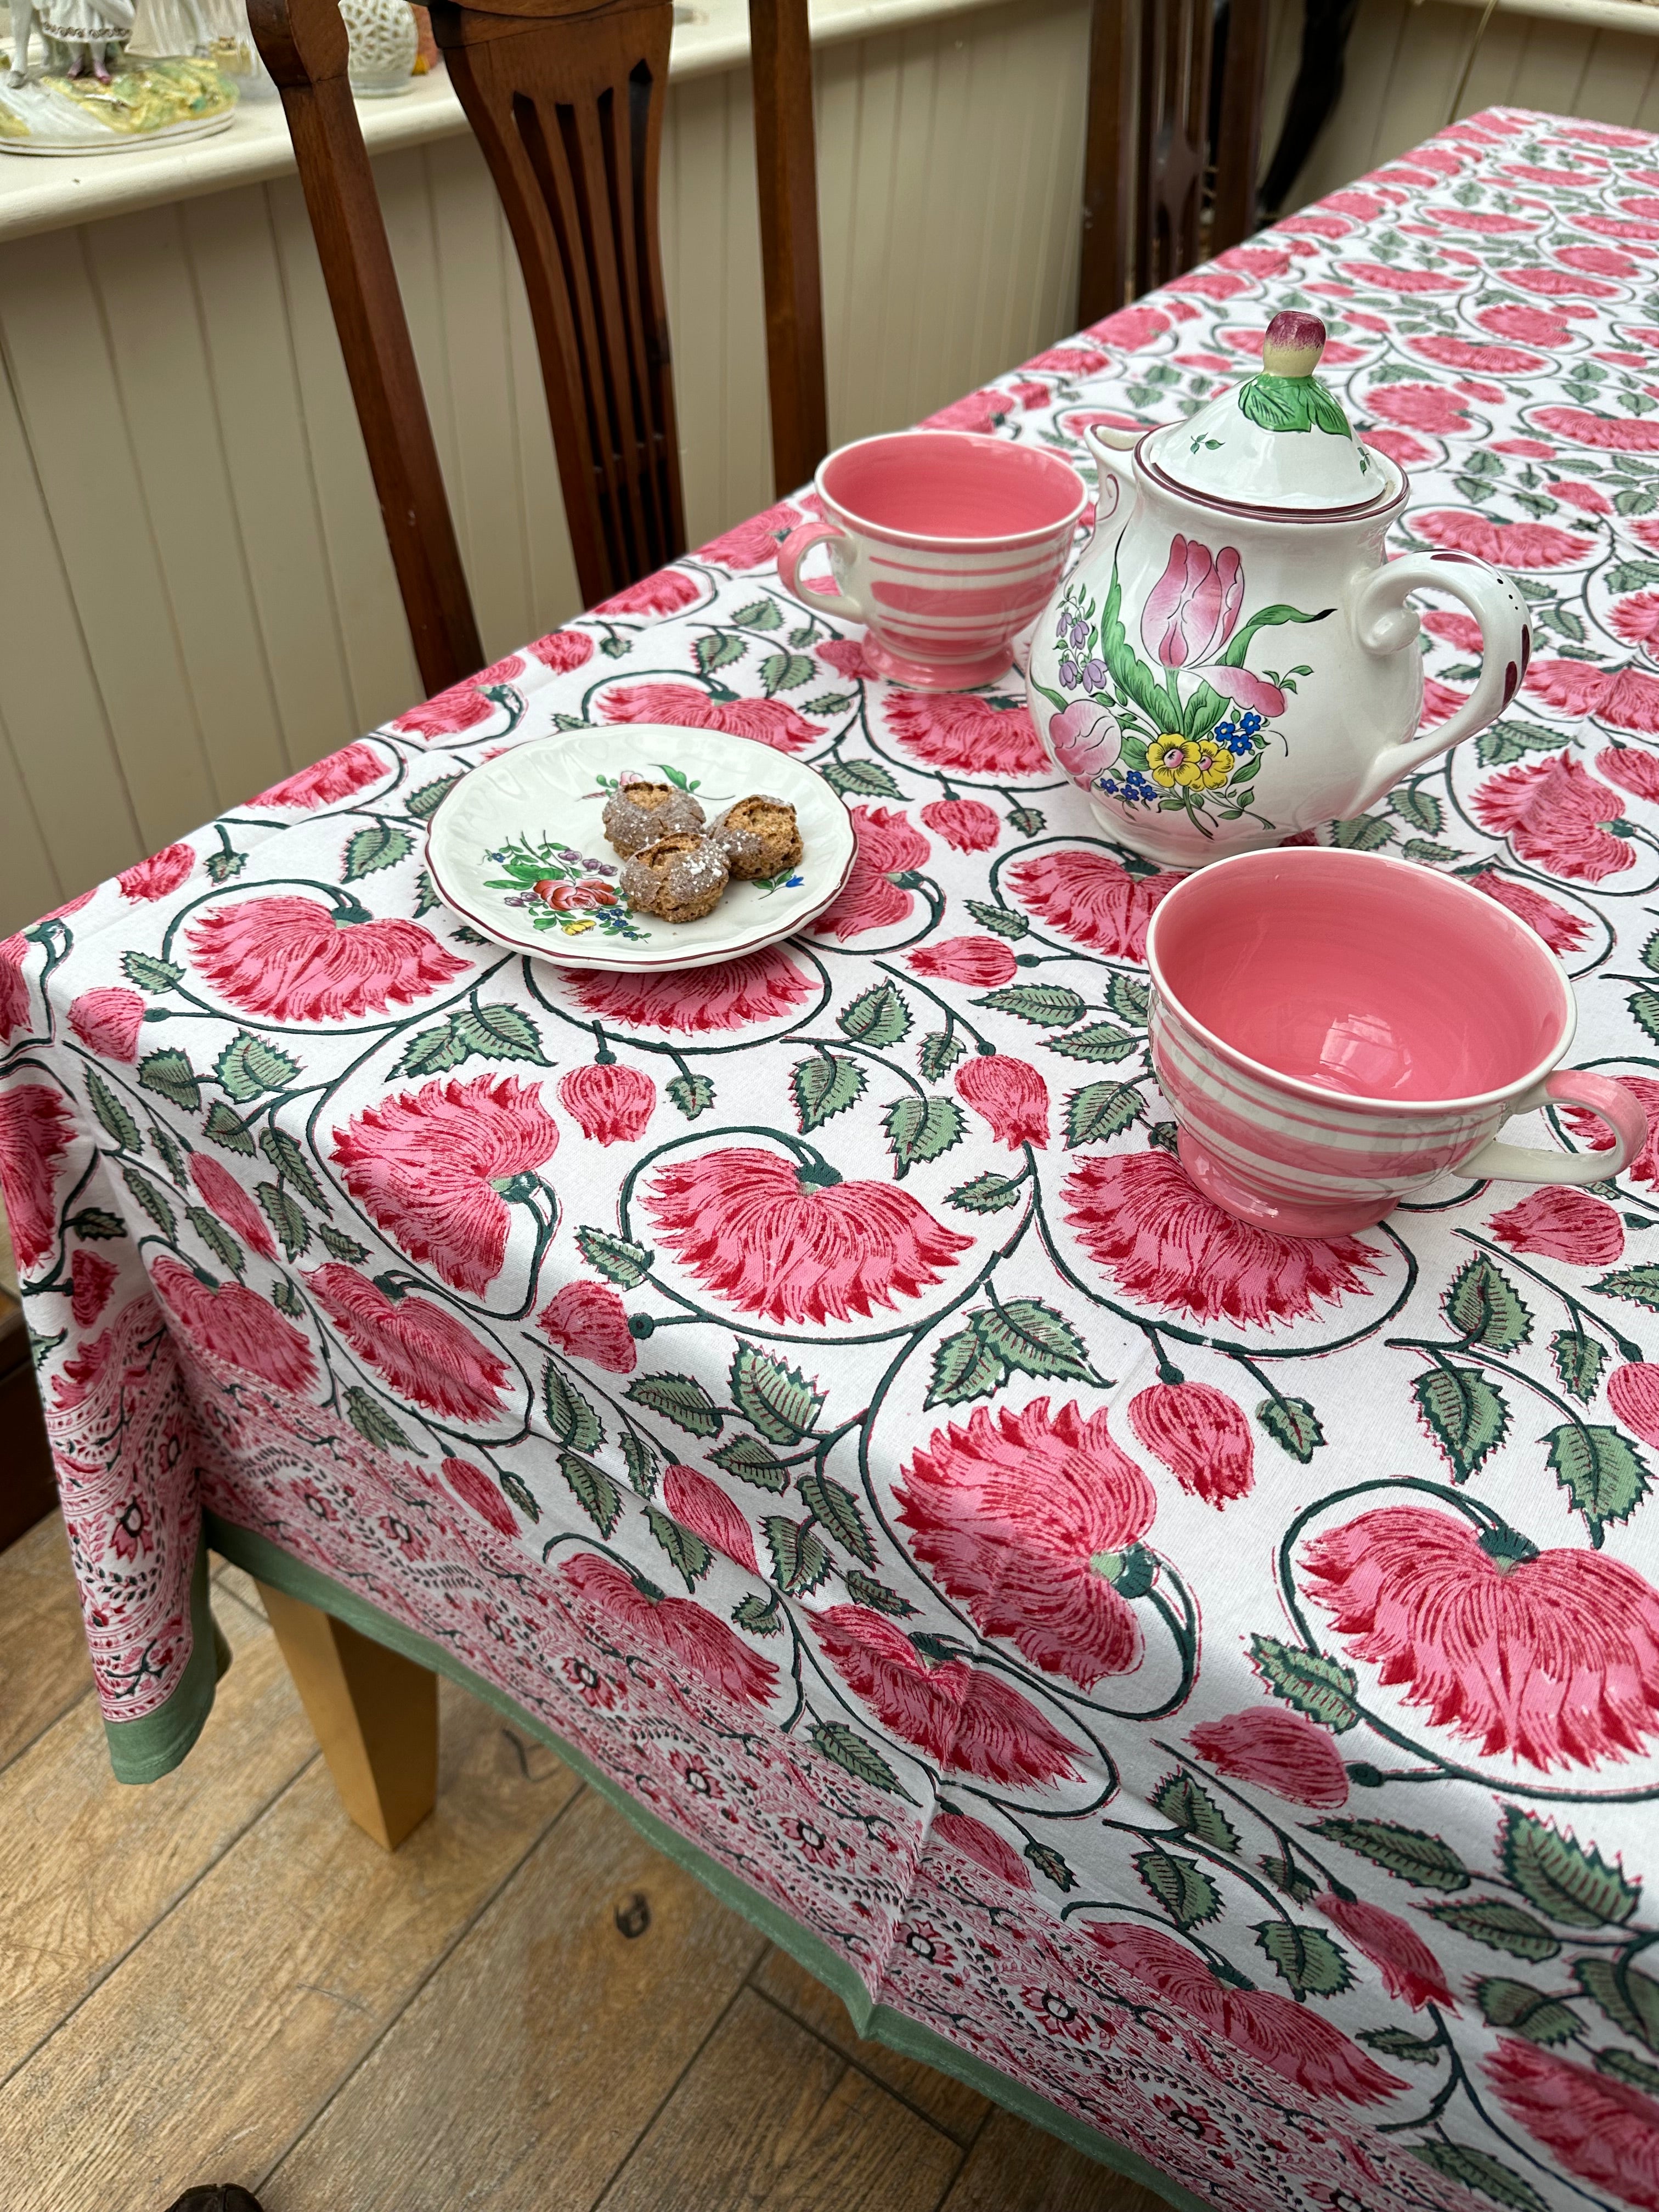 Wild Bazaar Pink and White Tuscany Tablecloth